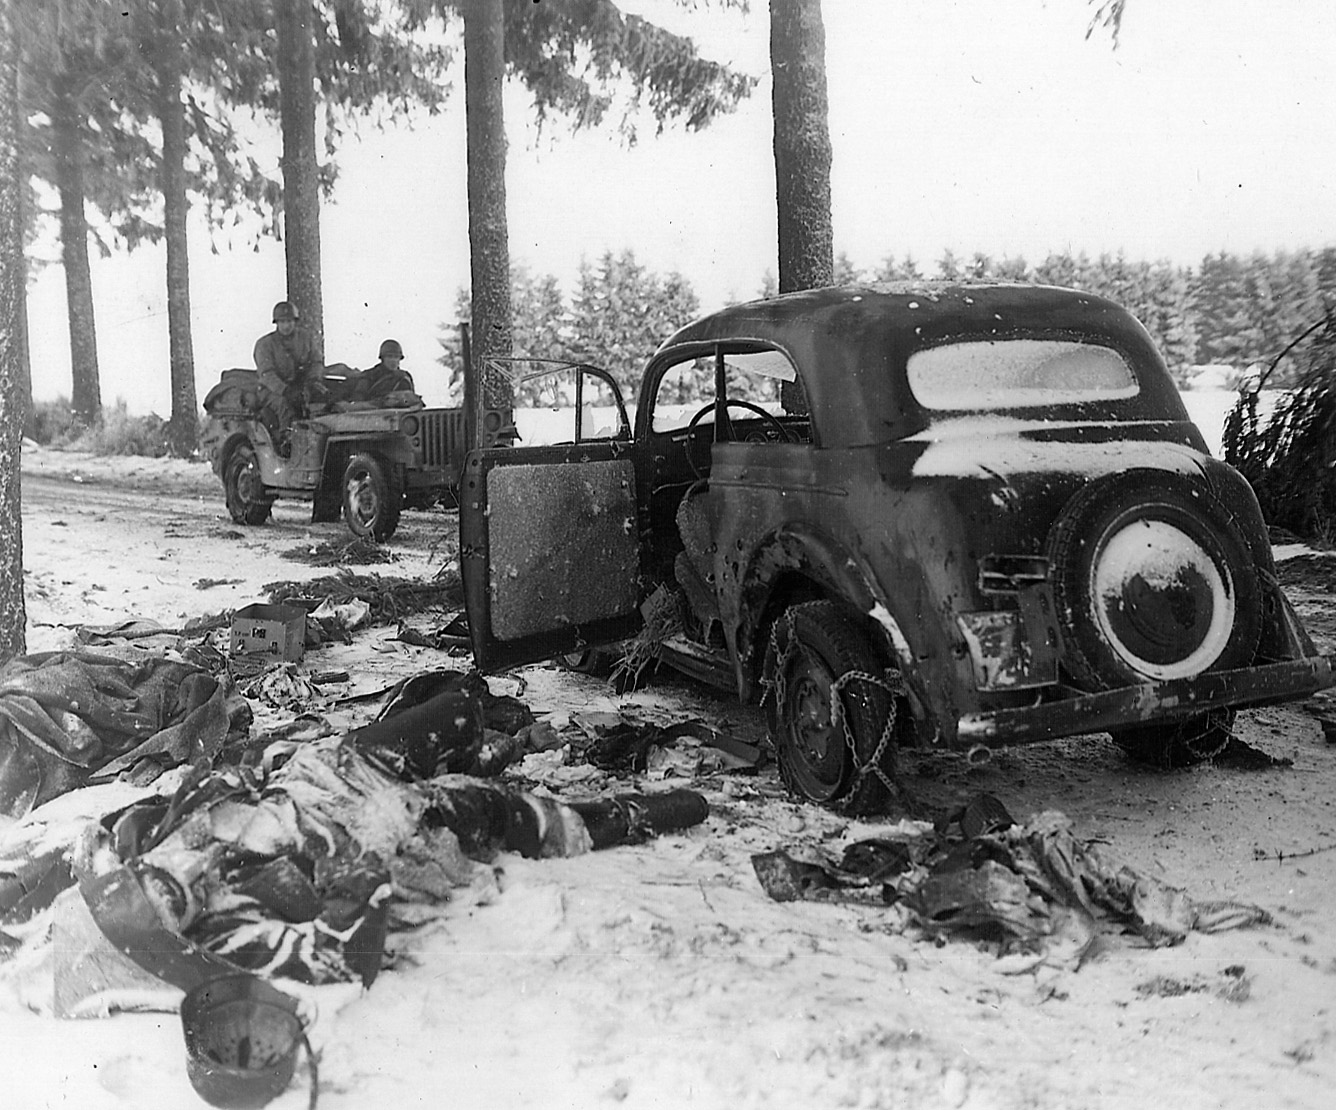 A Nazi SS captain lies dead behind his command car as U.S. soldiers survey the scene near Houffalize. 